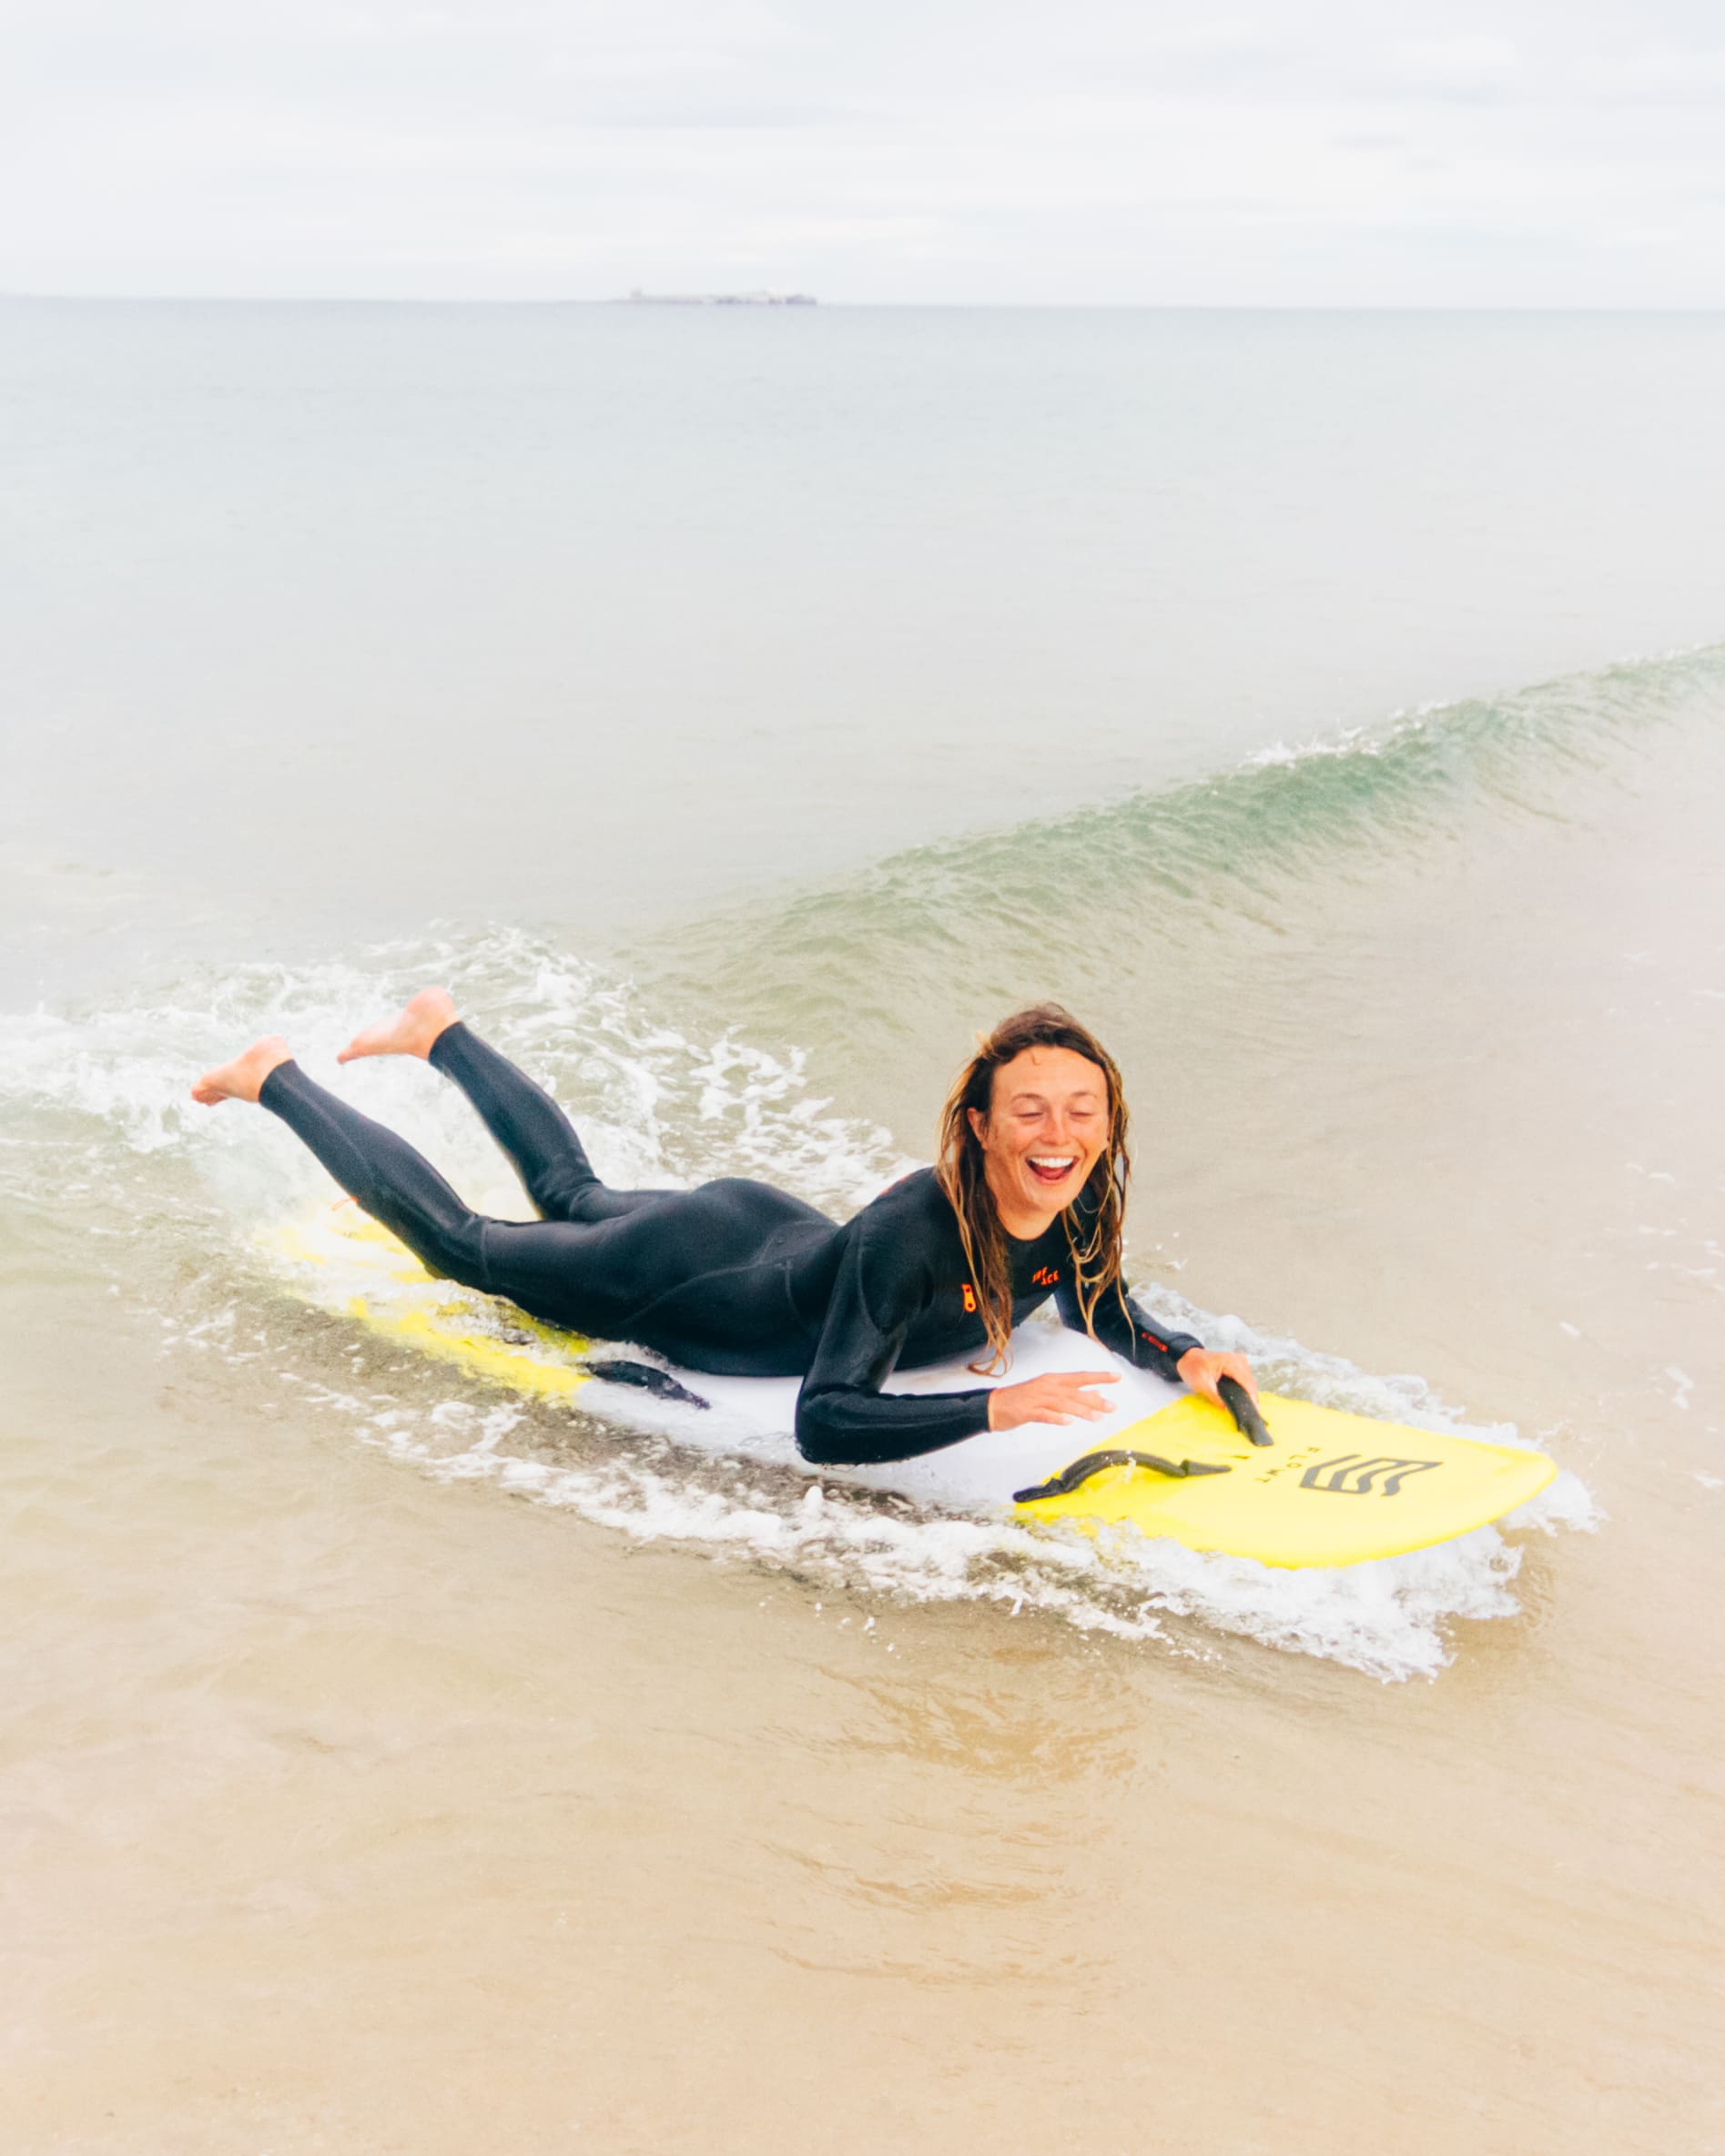 Emily of NE Surf rides a prone adapted surfboard